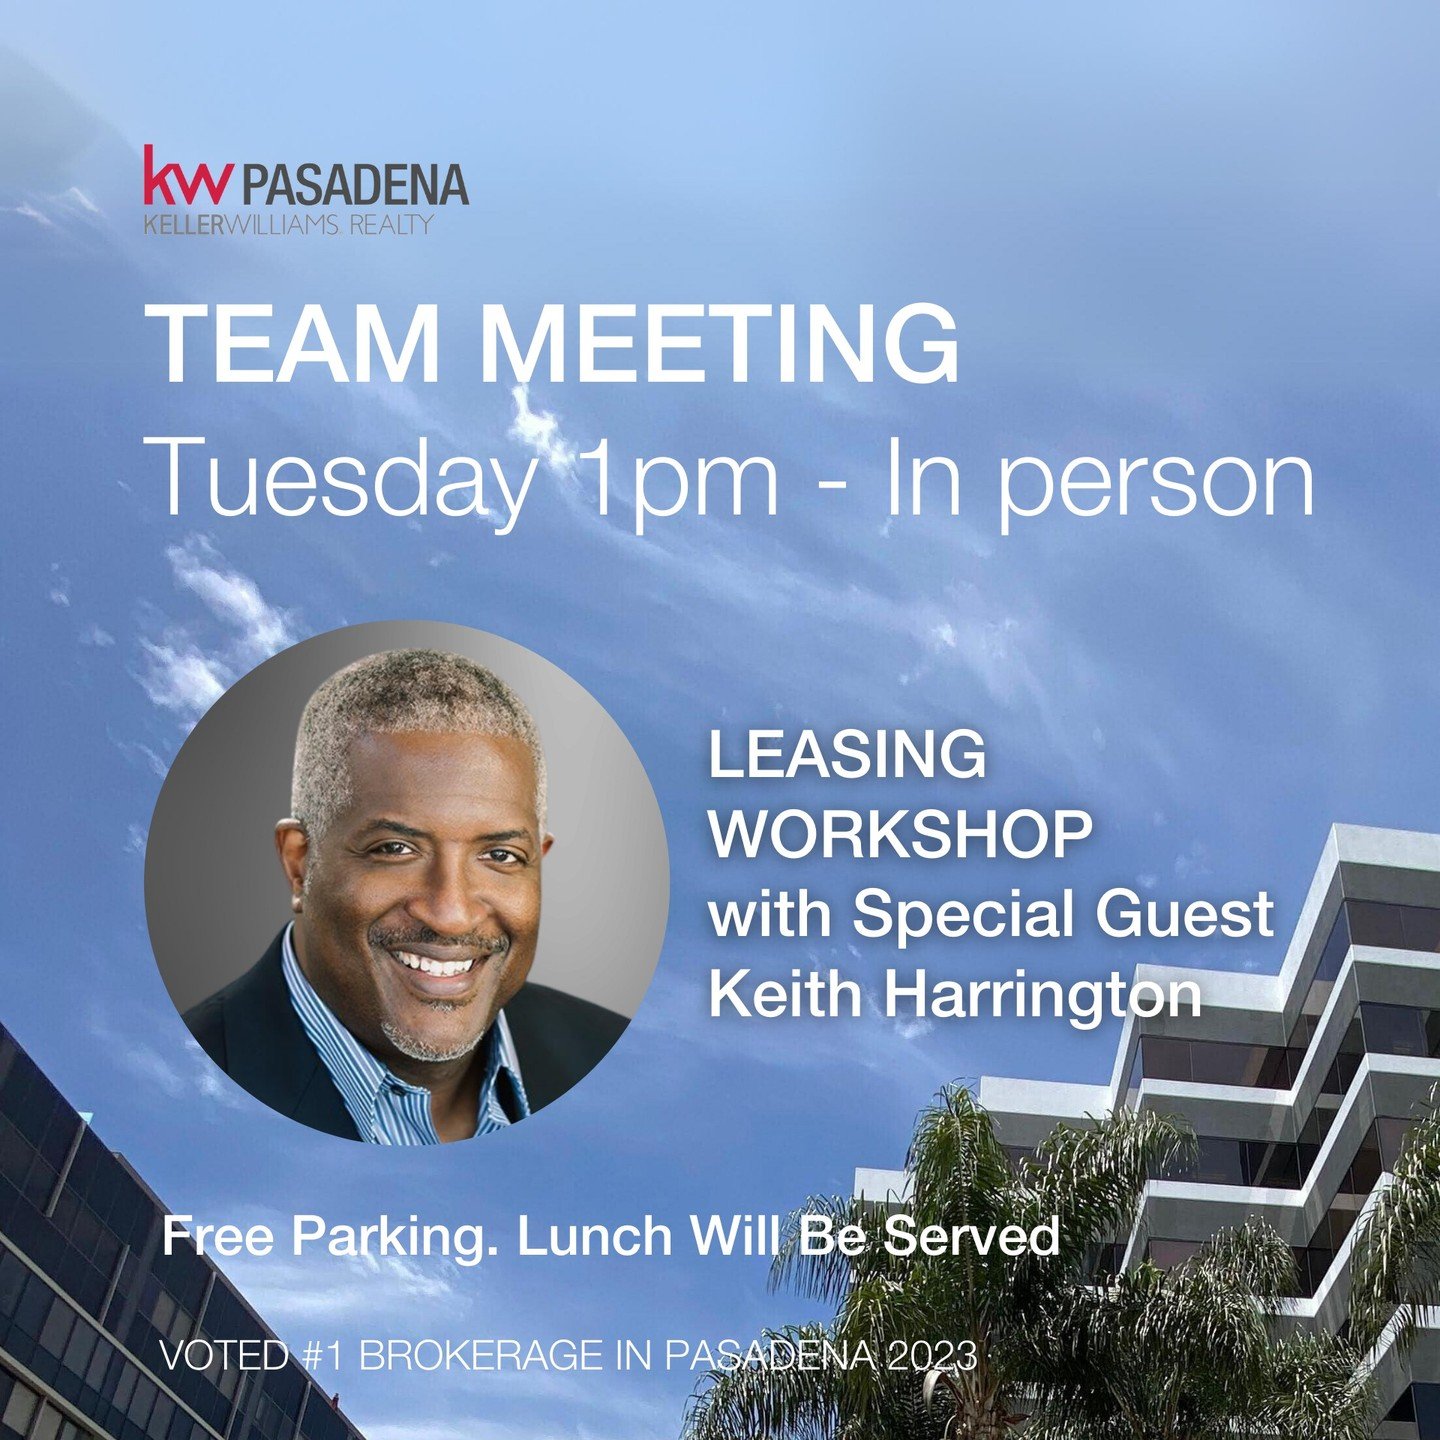 Join us tomorrow for our Team Meeting at 1pm with Special Guest Keith Harrington. Learn about the ins and outs of Leasing. Lunch will be provided. 
If you are a non-Keller Williams Agent, open to talking about your career goals. DM me or contact me w